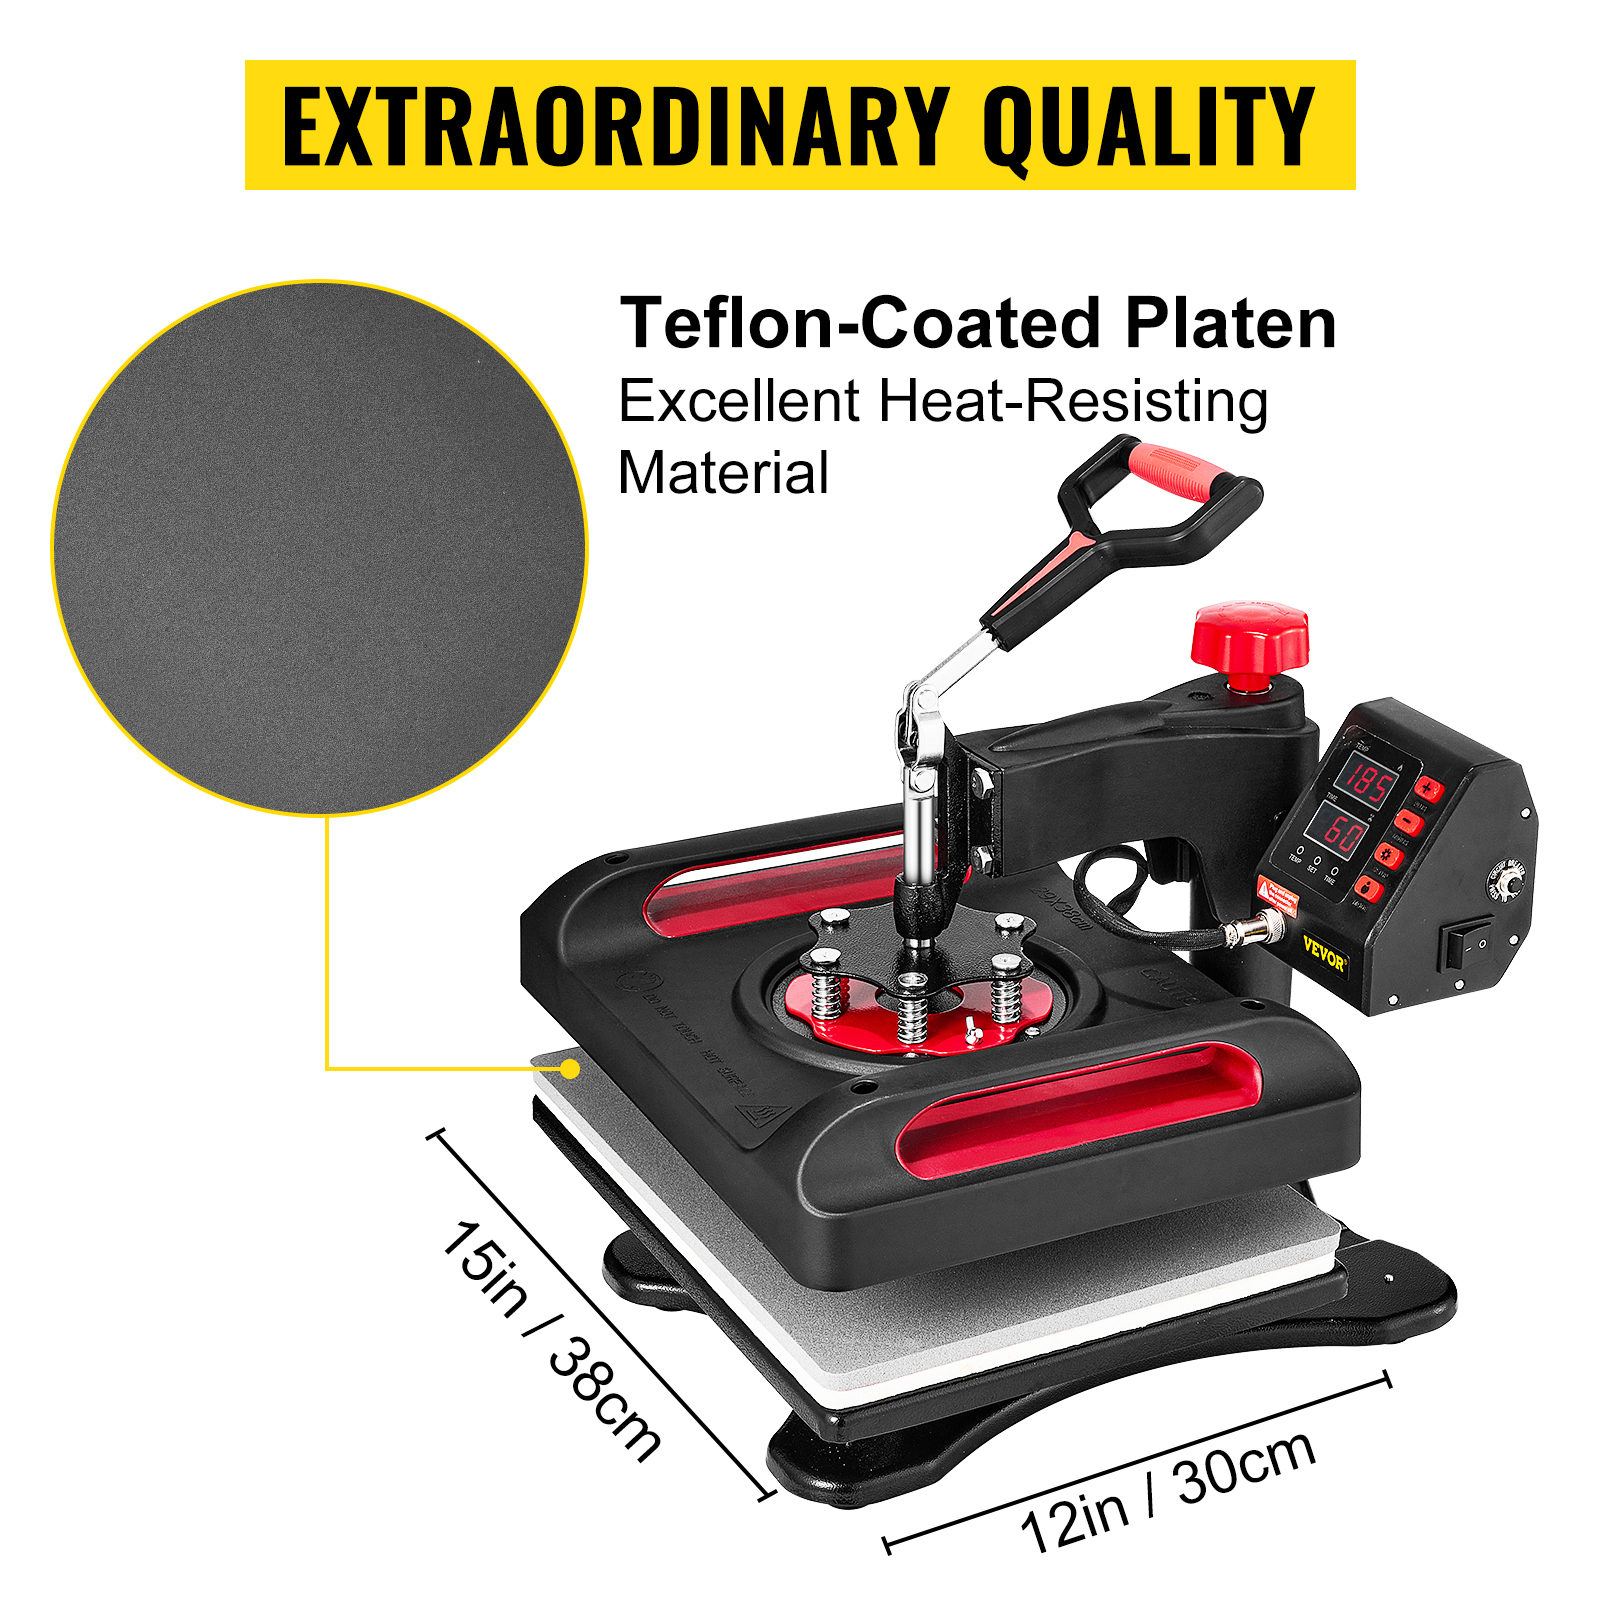 VEVOR Heat Press 15x15 Inch Heat Press Machine 5 in 1 Multifunctional  Sublimation Dual LED Display Heat Press Machine for t Shirts Swing Away  Design